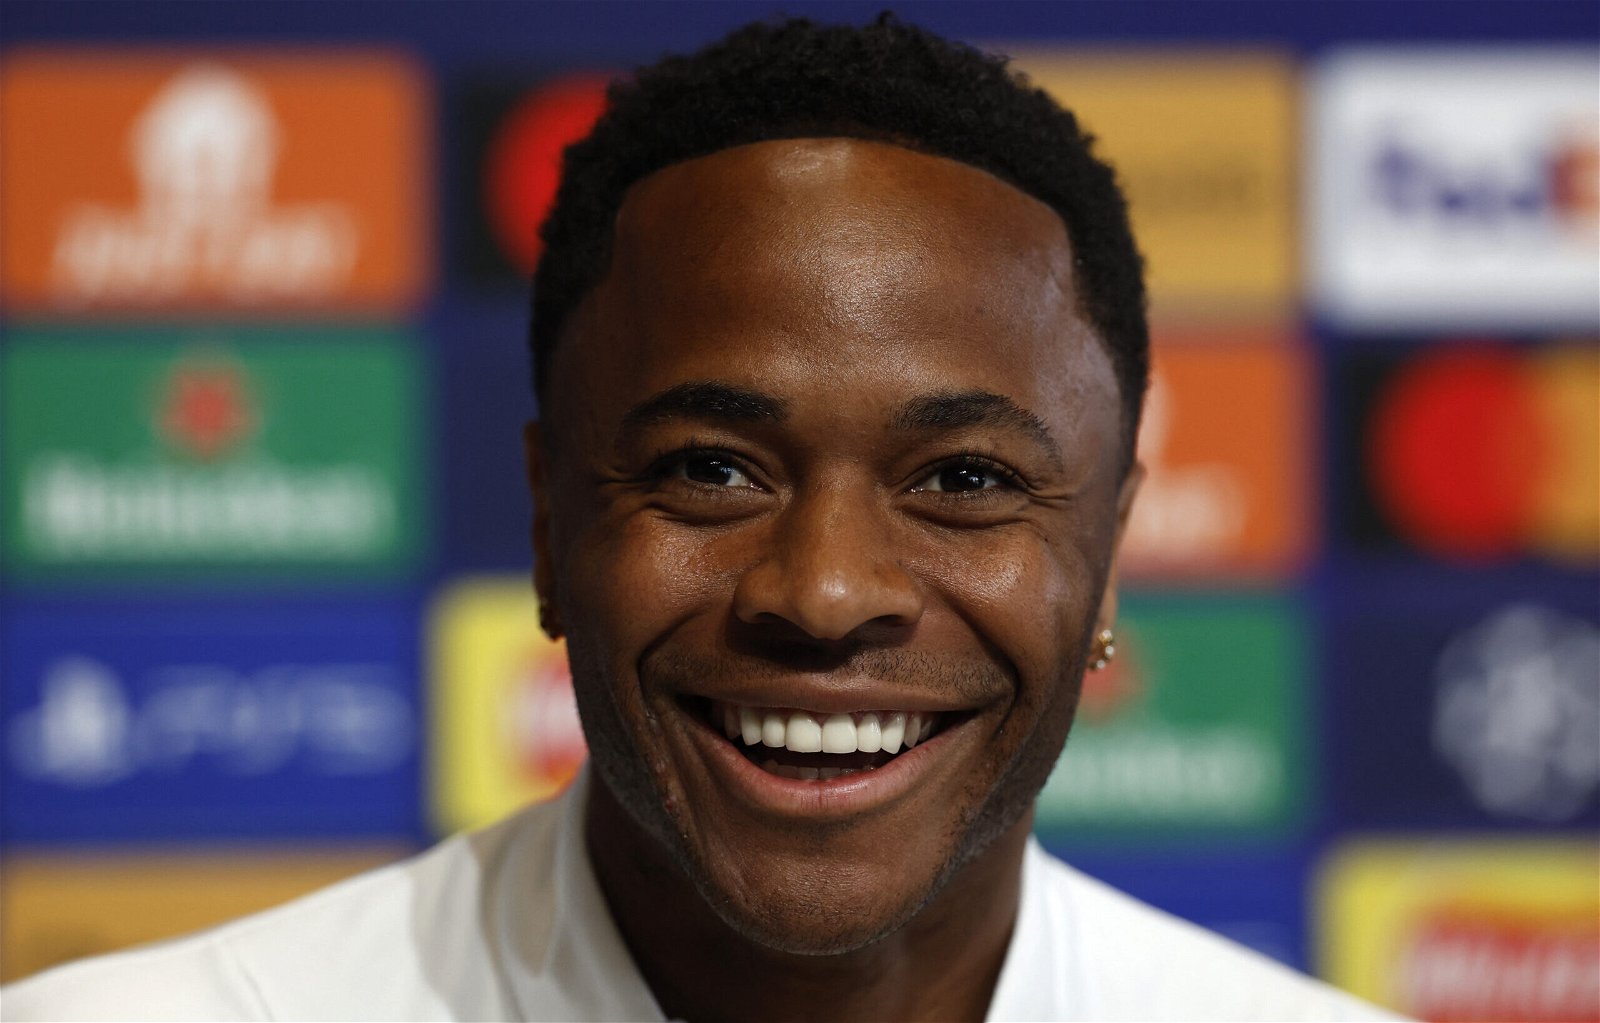 Manchester-City-star-Raheem-Sterling-smiles-in-a-press-conference-ahead-of-Champions-League-game-against-Real-Madrid